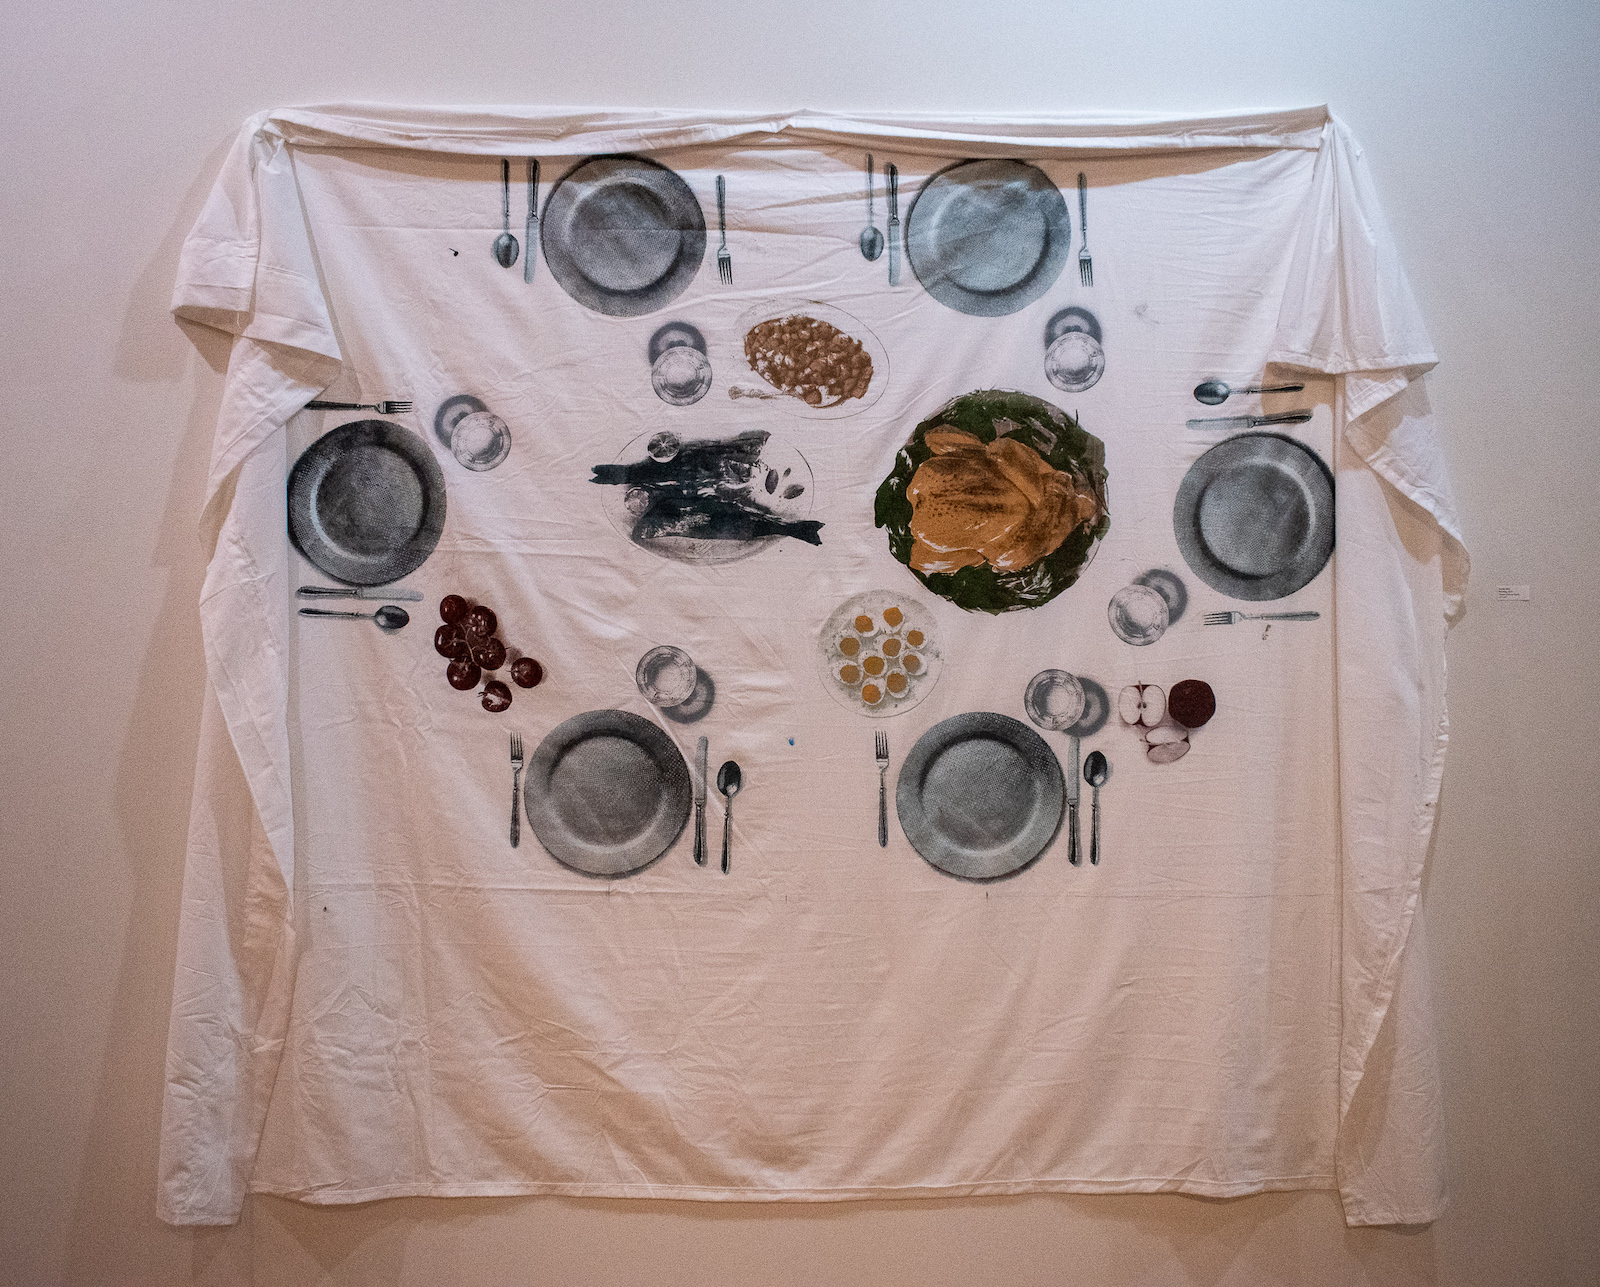 A blanket printed with an illustration of a dinner table spread hung on the wall